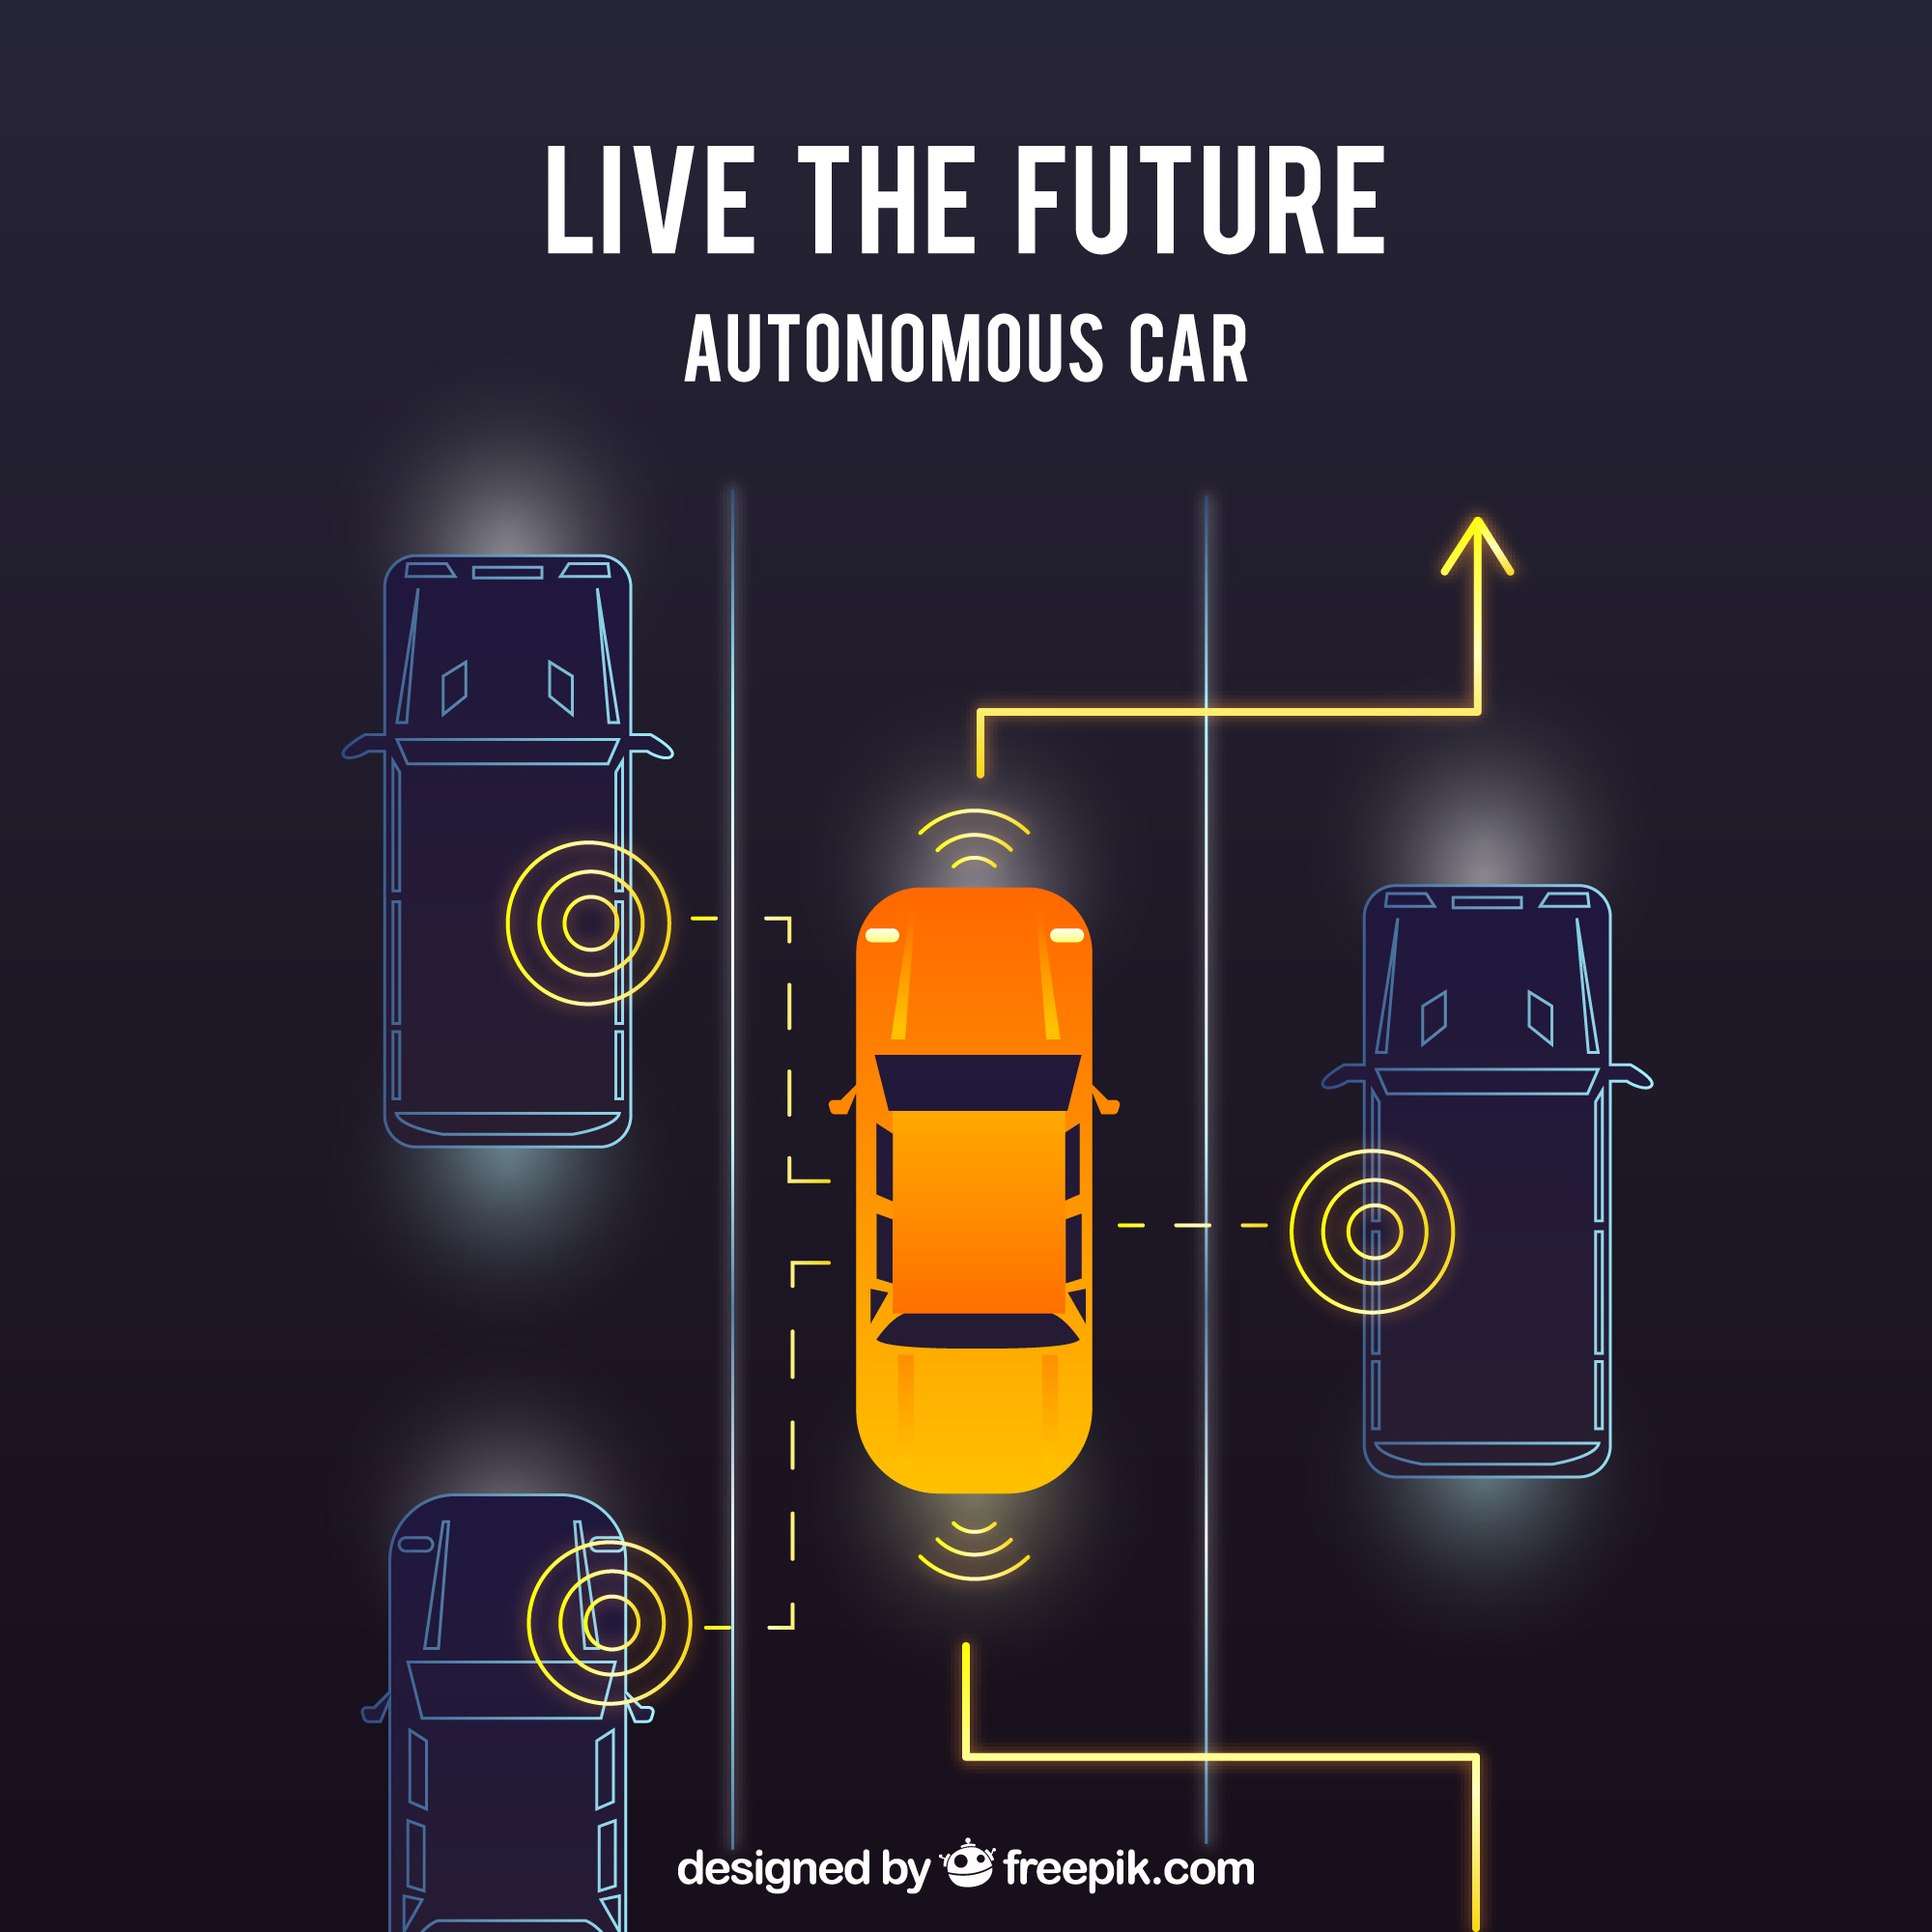 New Level 4 Autonomous Driving Regulation boosts Germany's future in driverless mobility 1